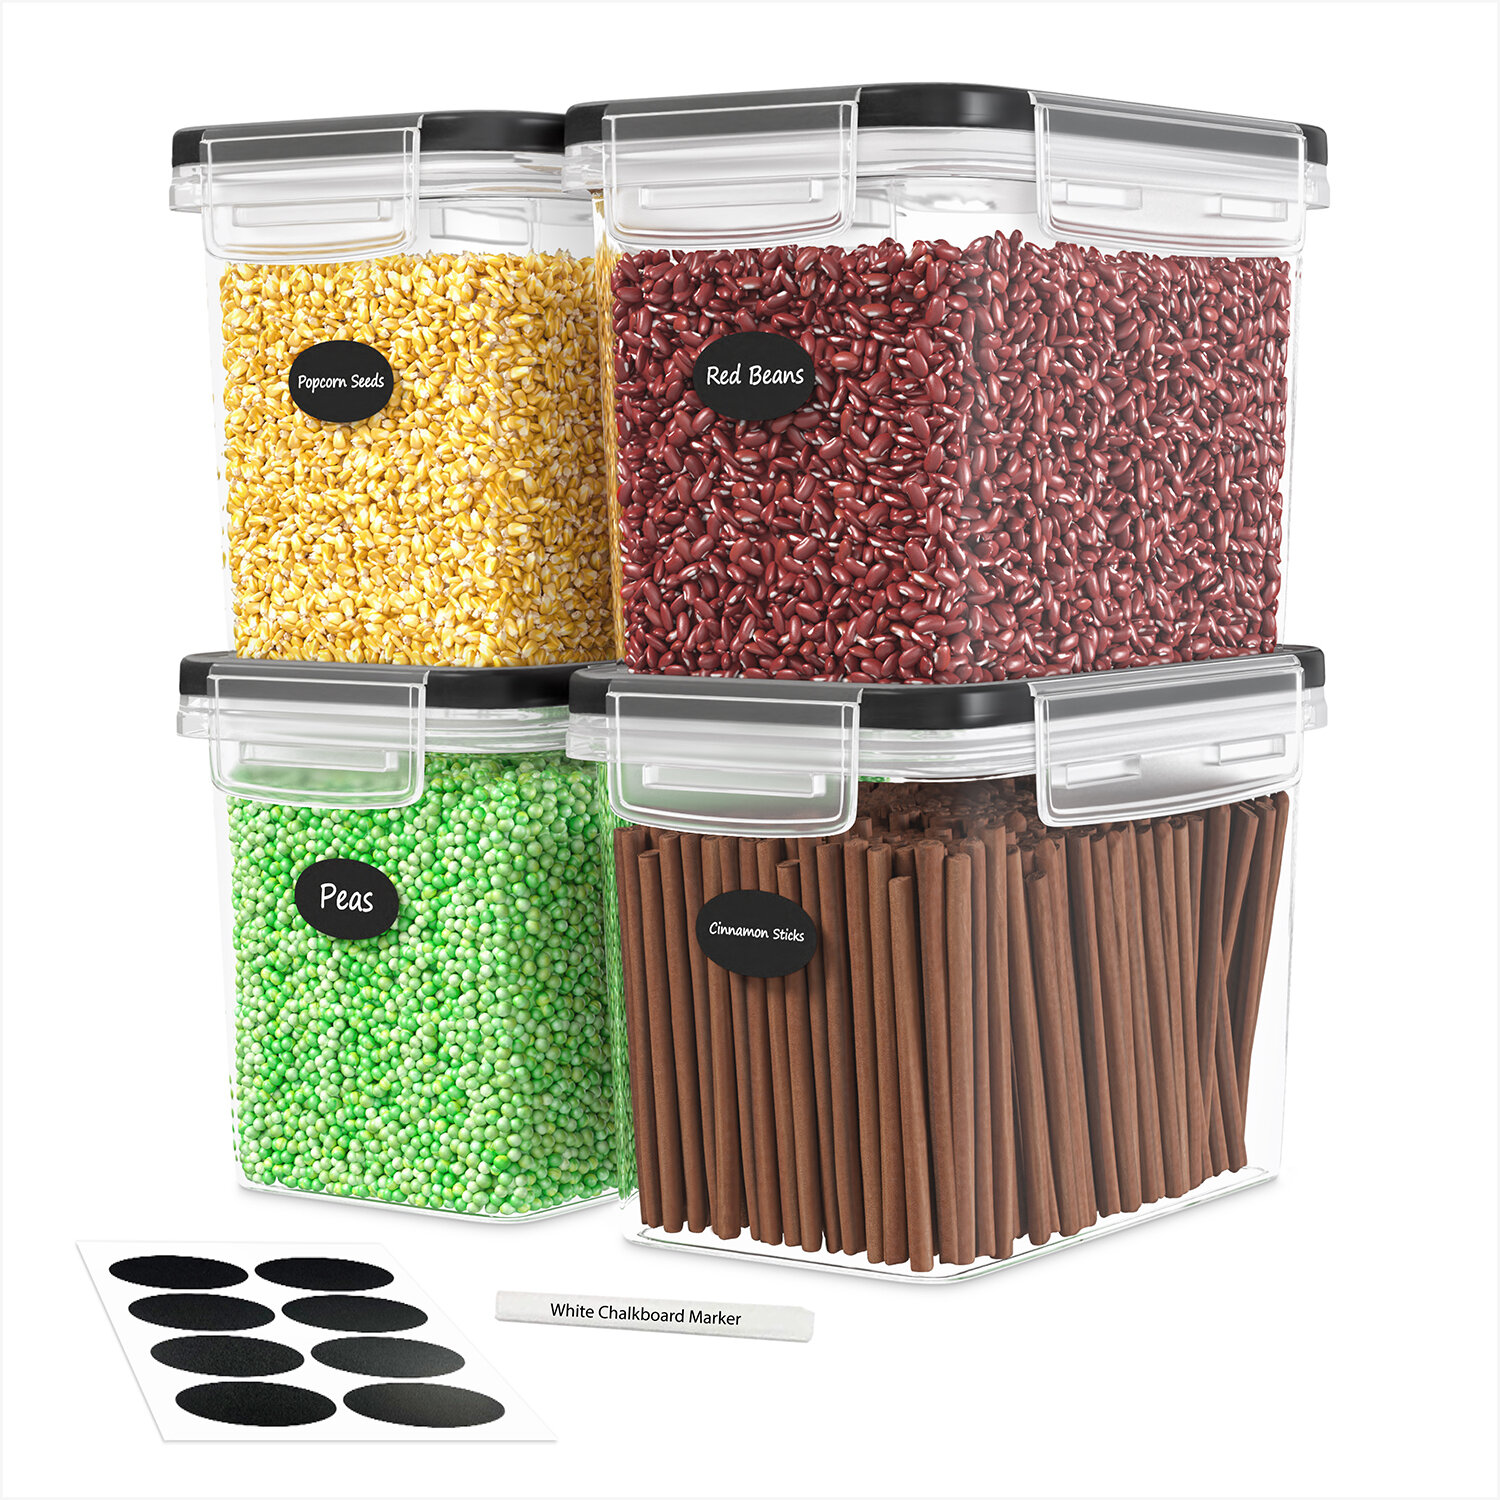 DW LLZA KITCHEN Cereal Containers Storage - 4 Pack Cereal